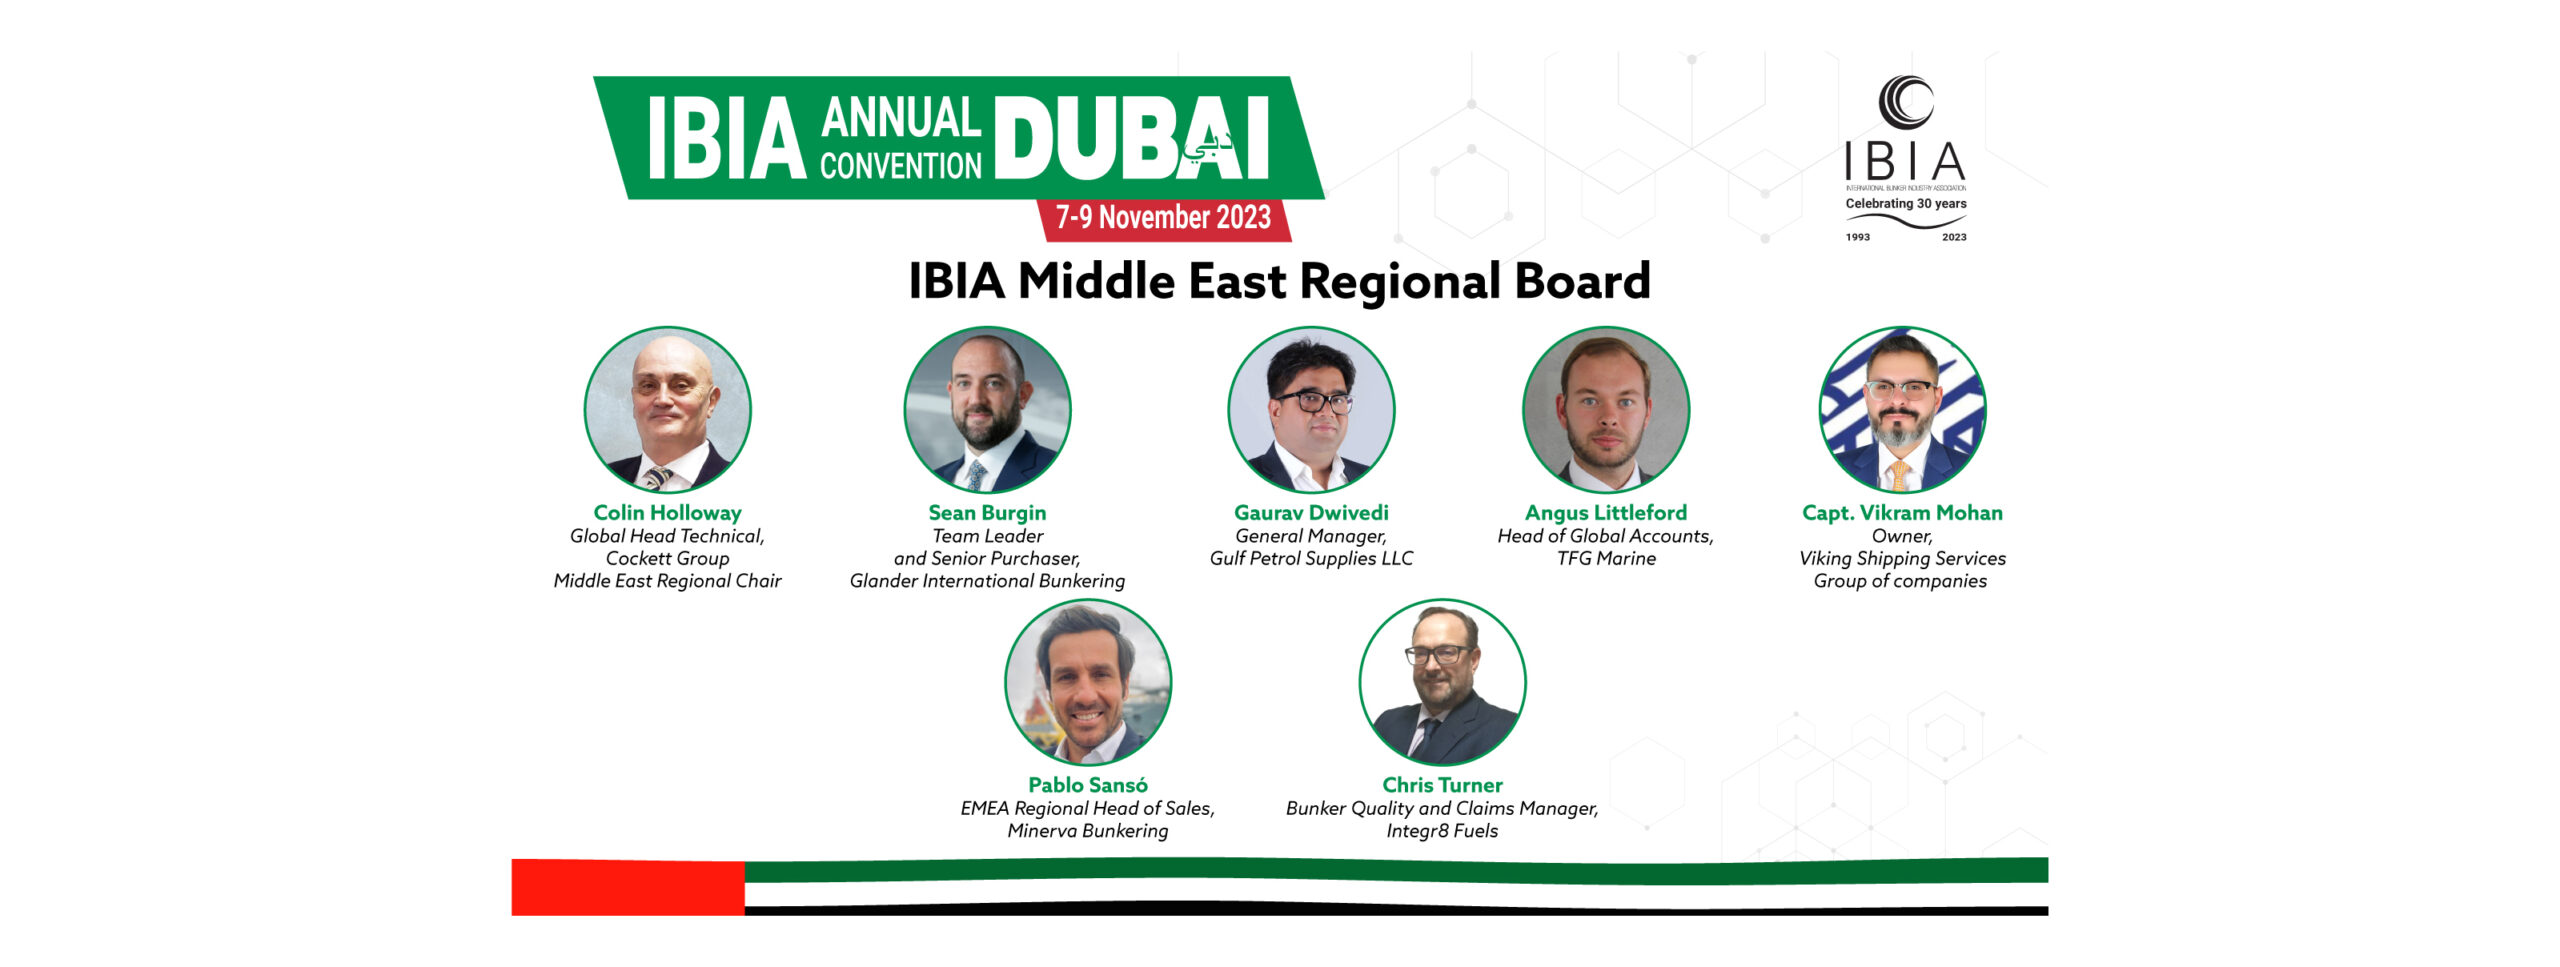 Meet the newly established IBIA Middle East Regional Board at the IBIA Annual Convention 2023